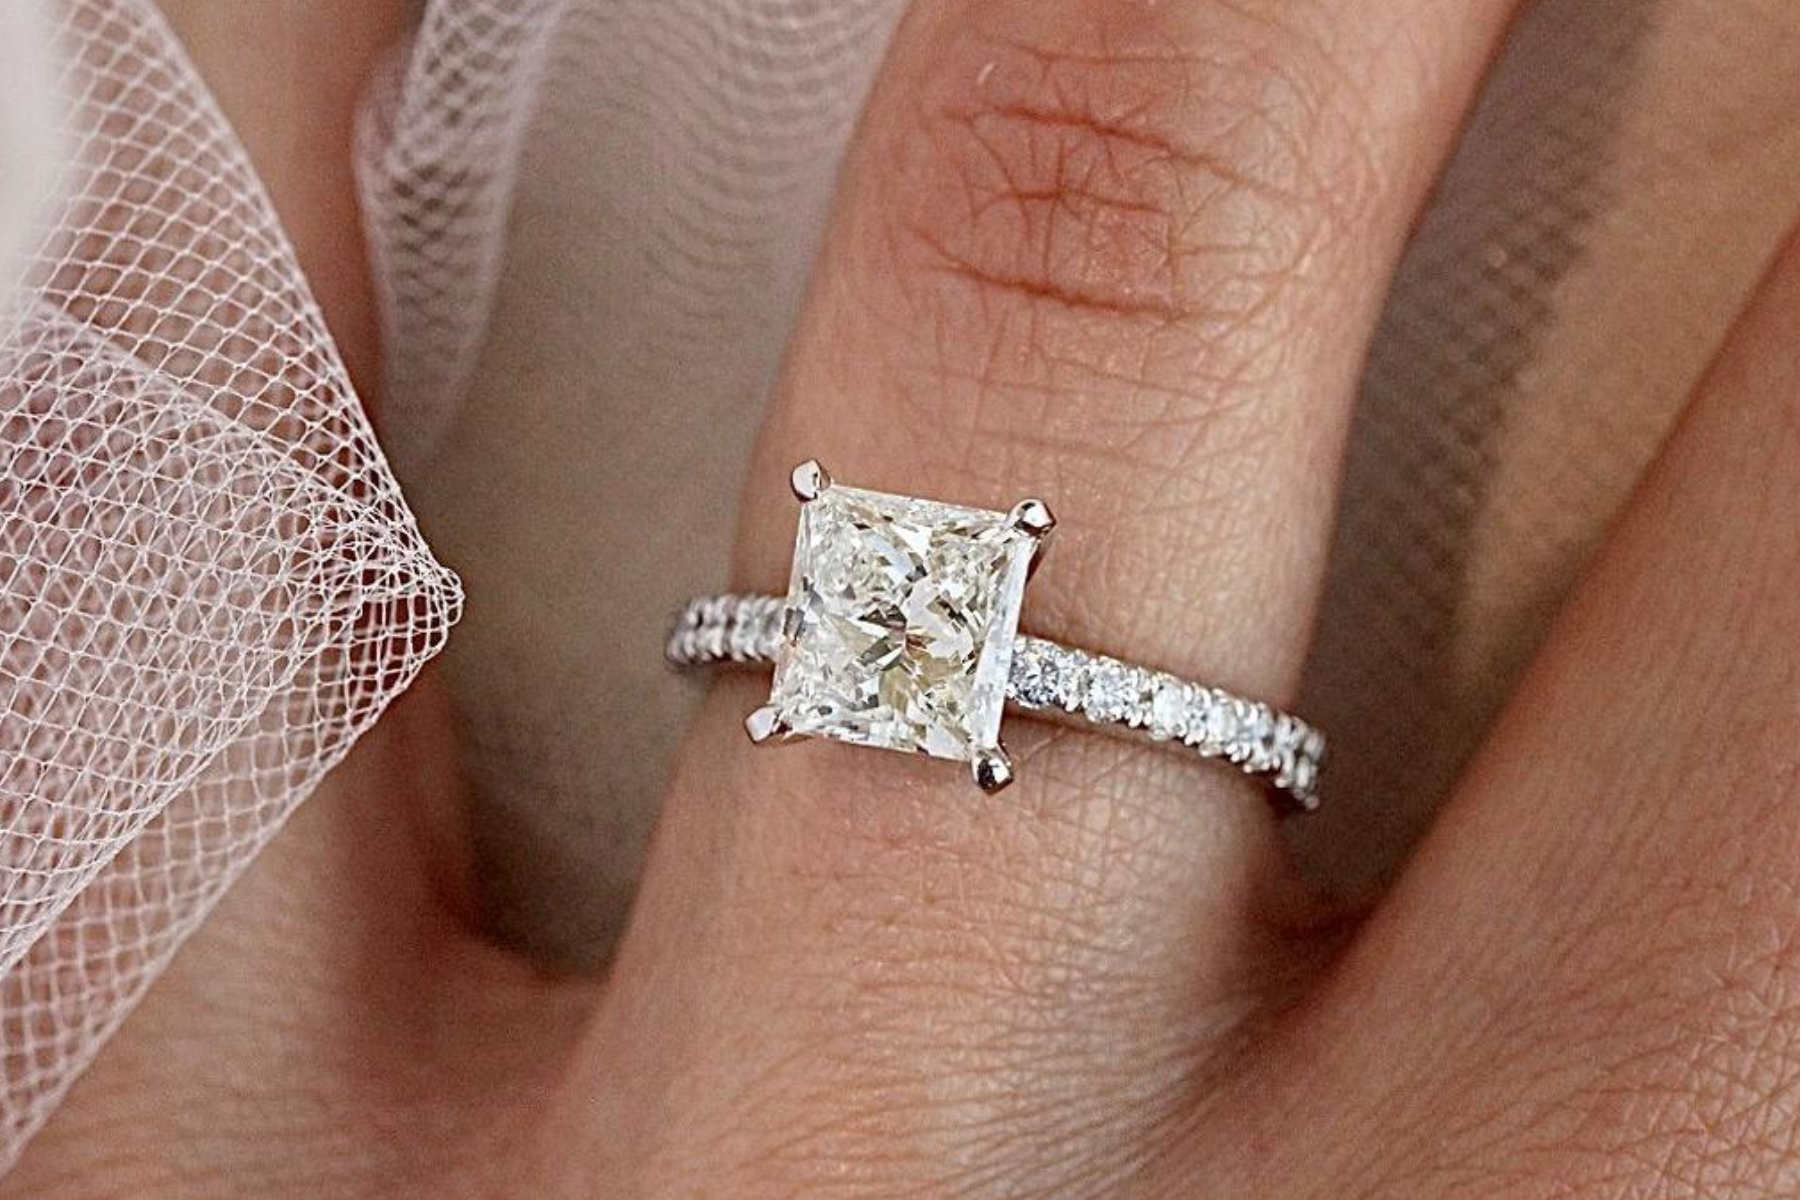 Princess Cut Engagement Rings - One Of The Brilliant Cuts